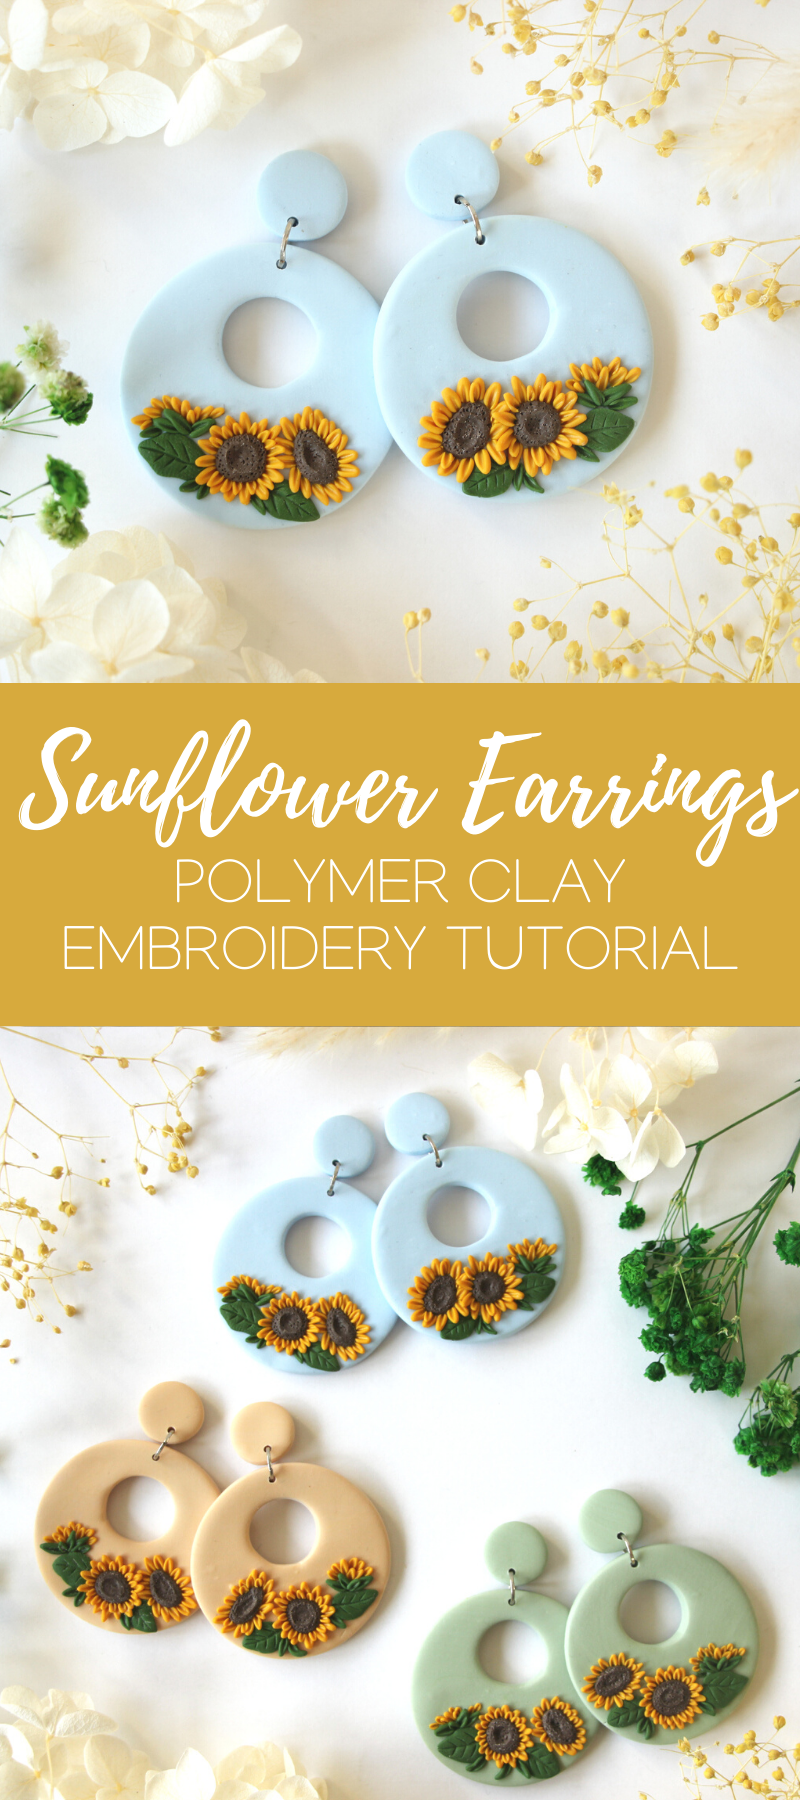 What Tools Are Needed To Make Polymer Clay Jewellery?